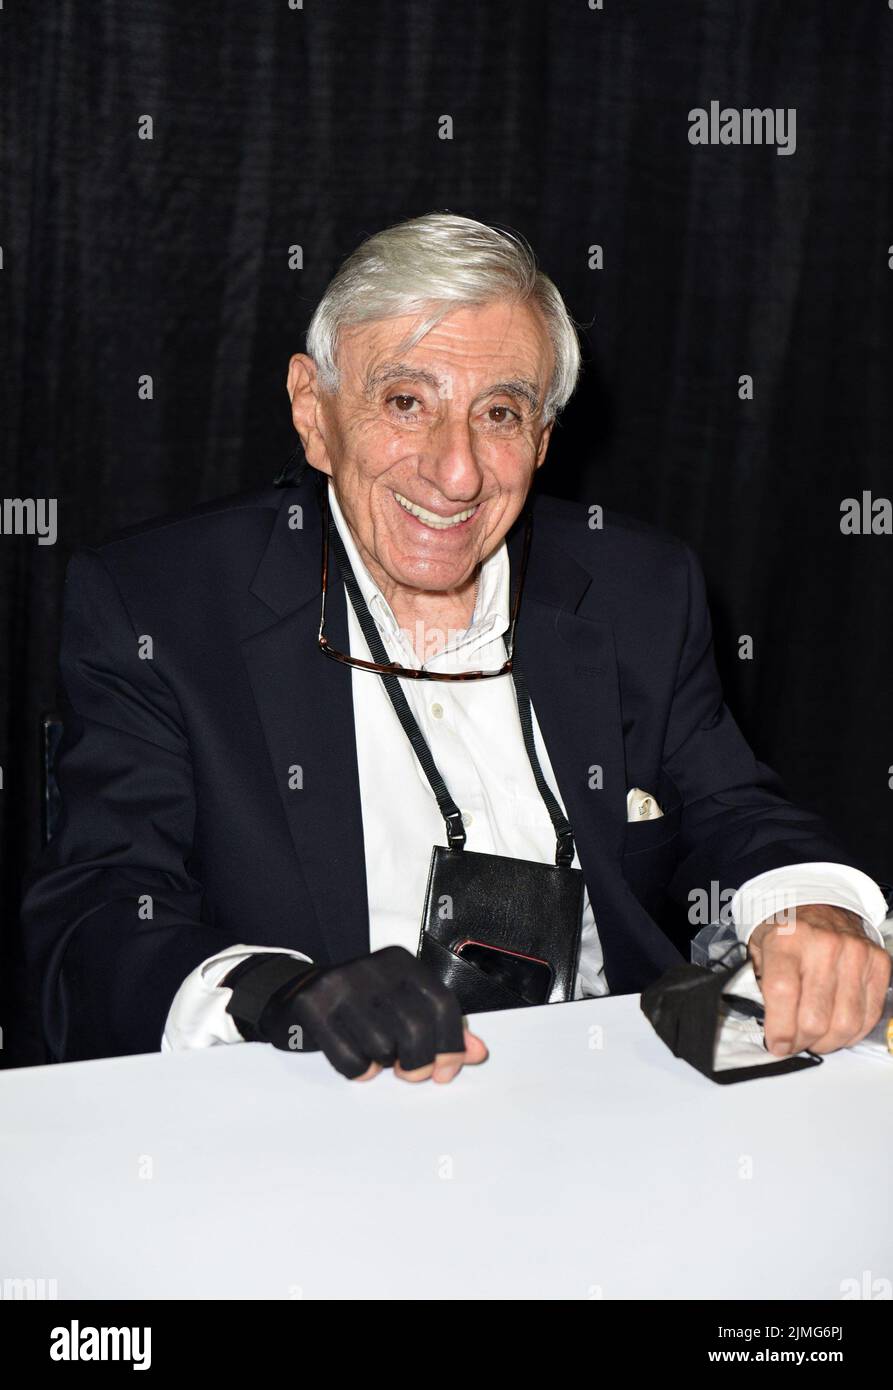 Knoxville, TN, USA. 5th Aug, 2022. Jamie Farr in attendance for Fanboy Expo 2022, Knoxville Convention Center, Knoxville, TN August 5, 2022. Credit: Derek Storm/Everett Collection/Alamy Live News Stock Photo